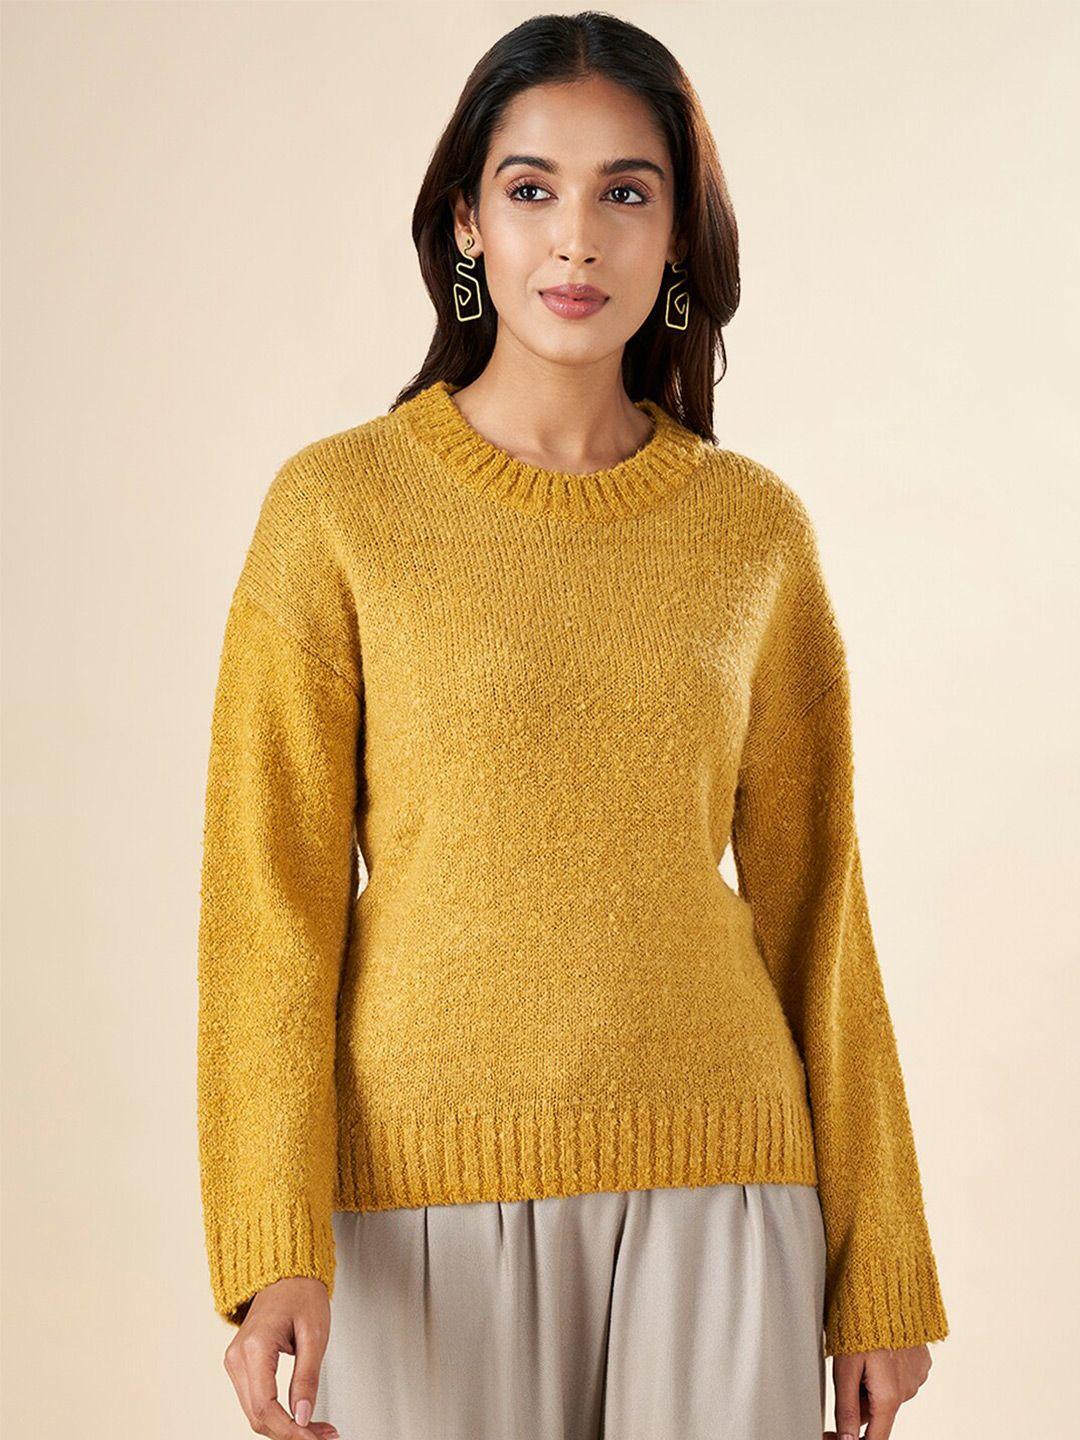 akkriti-by-pantaloons-long-sleeves-round-neck-acrylic-pullover-sweater